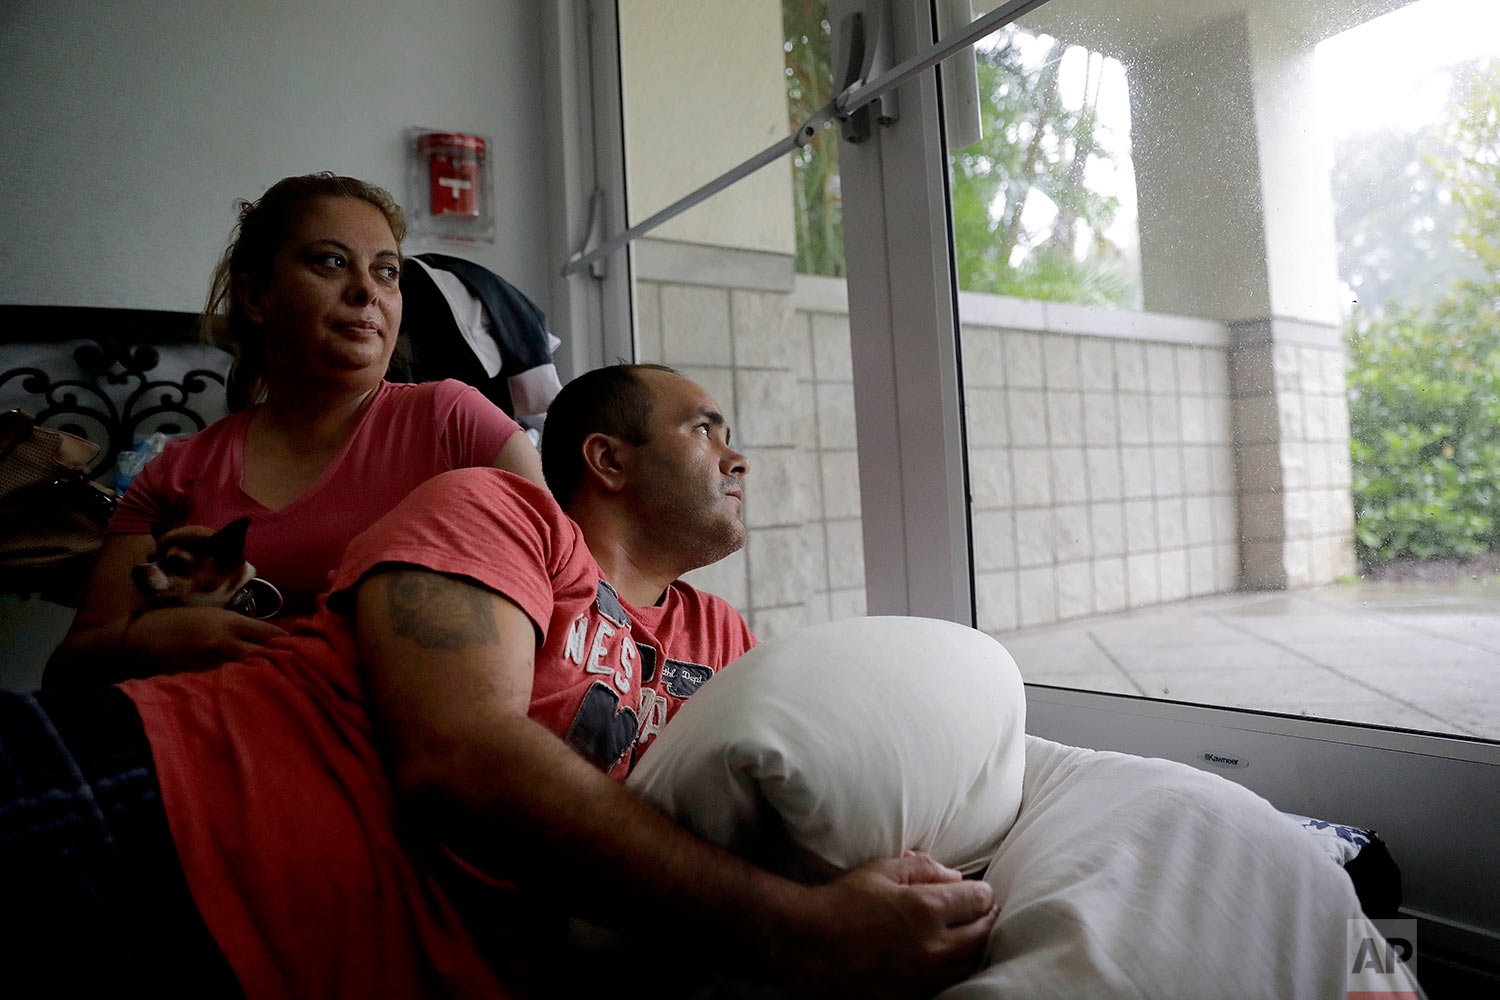  Javier Garcia, right, and his wife Marissa Soto sit with their neighbor's dog Ilito as they ride out Hurricane Irma in a shelter in Naples, Fla., Sunday, Sept. 10, 2017. (AP Photo/David Goldman) 